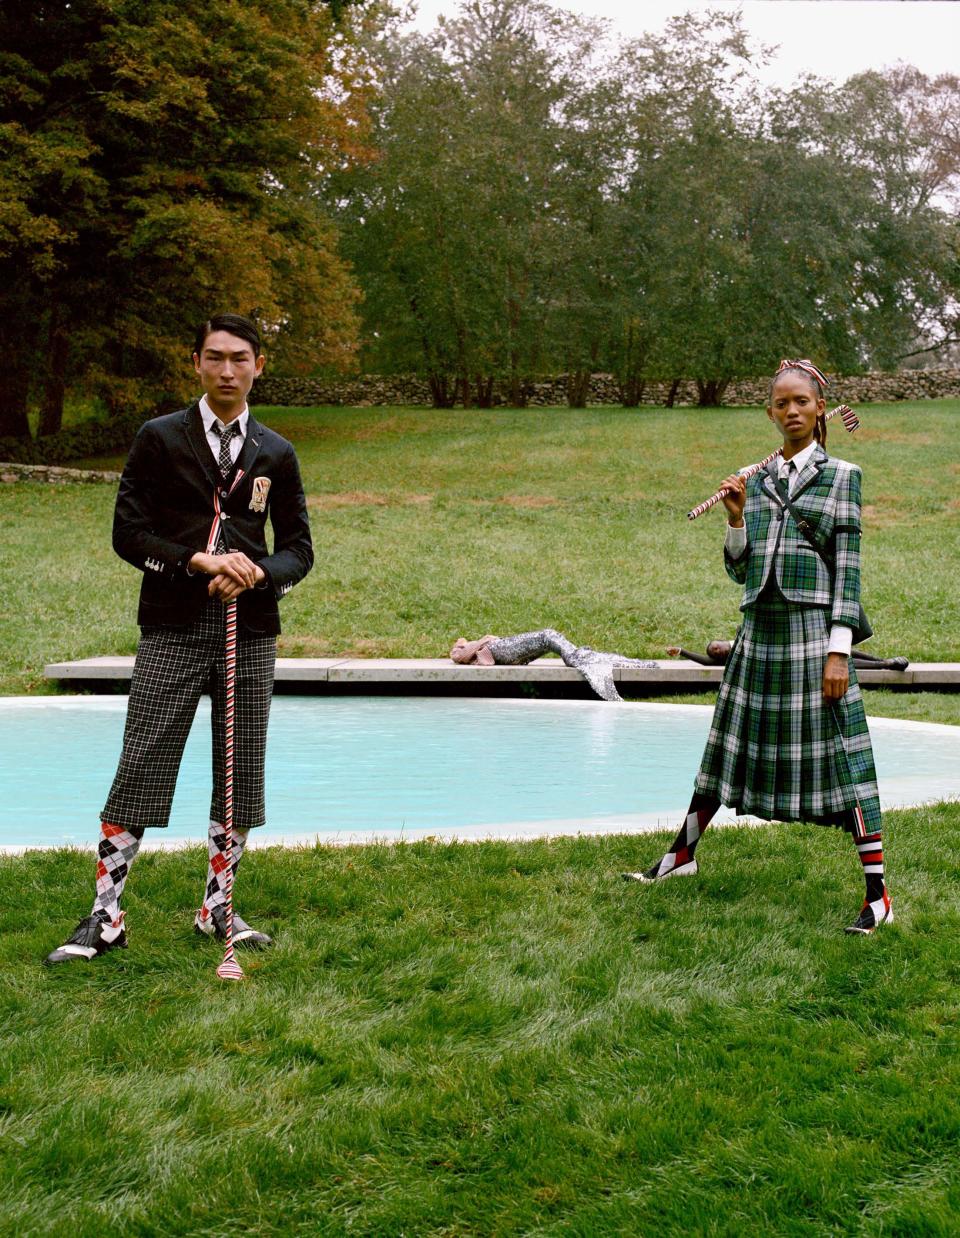 Argyles abound in Thom Browne’s new capsule collection.